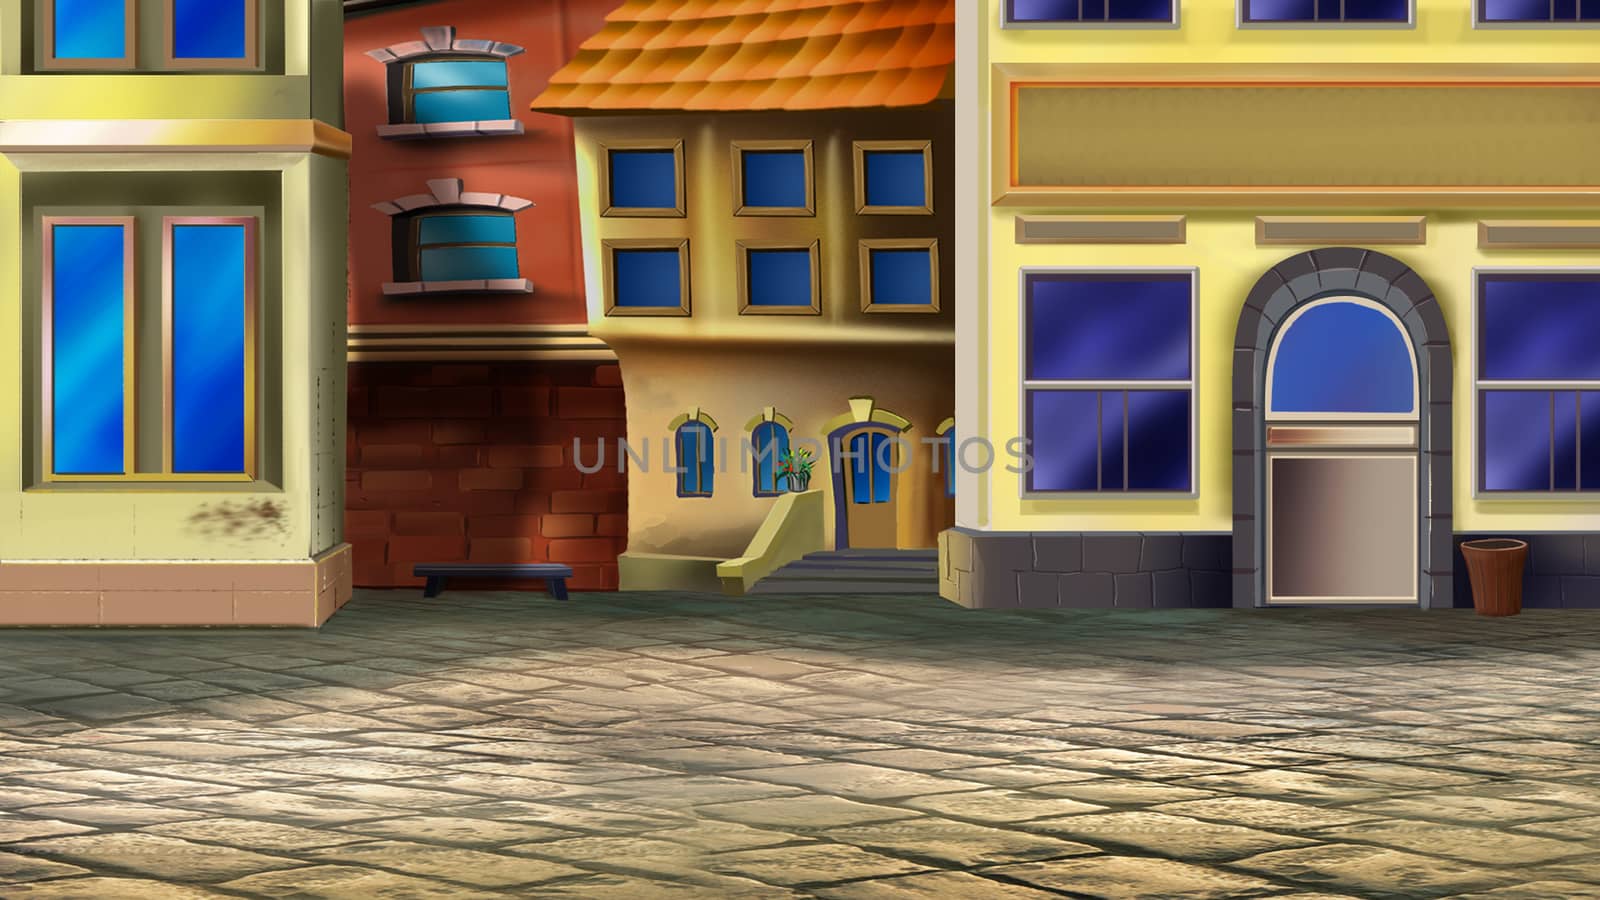 Digital painting of the corner of the old town.